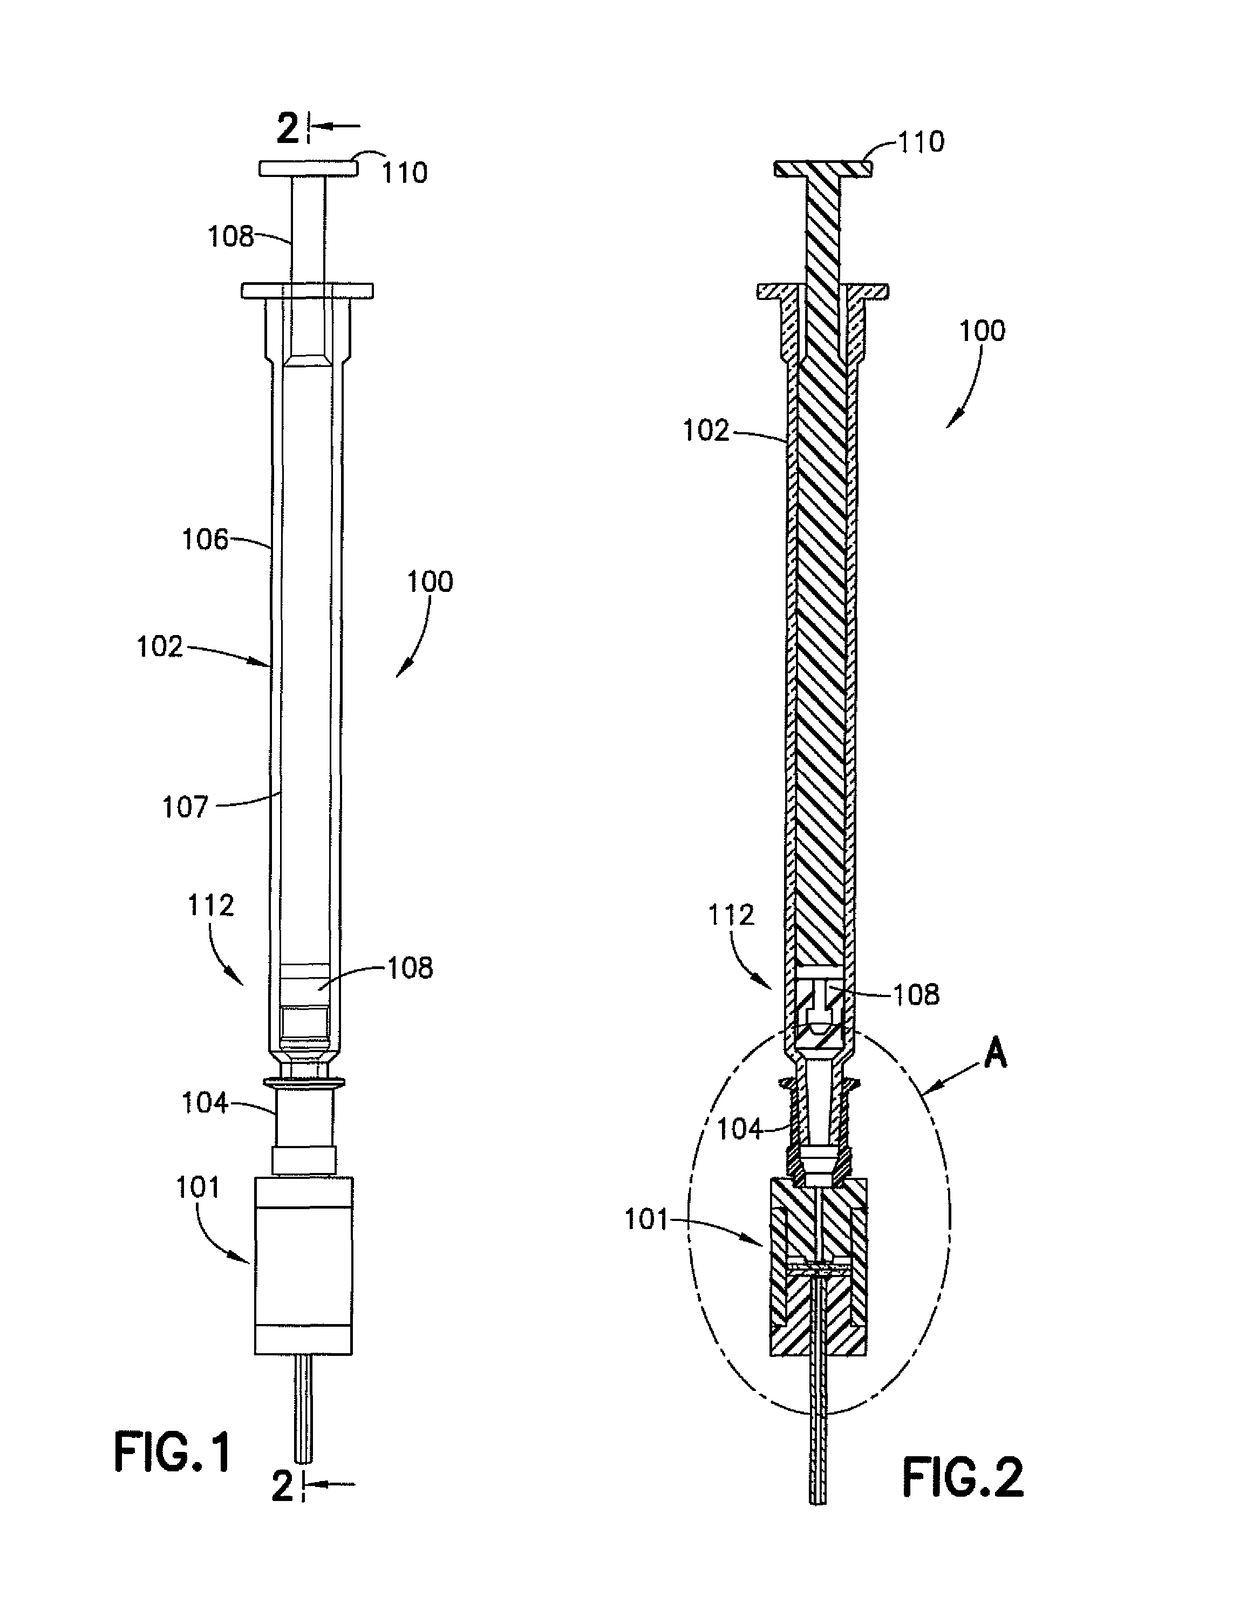 Sample extraction and preparation device